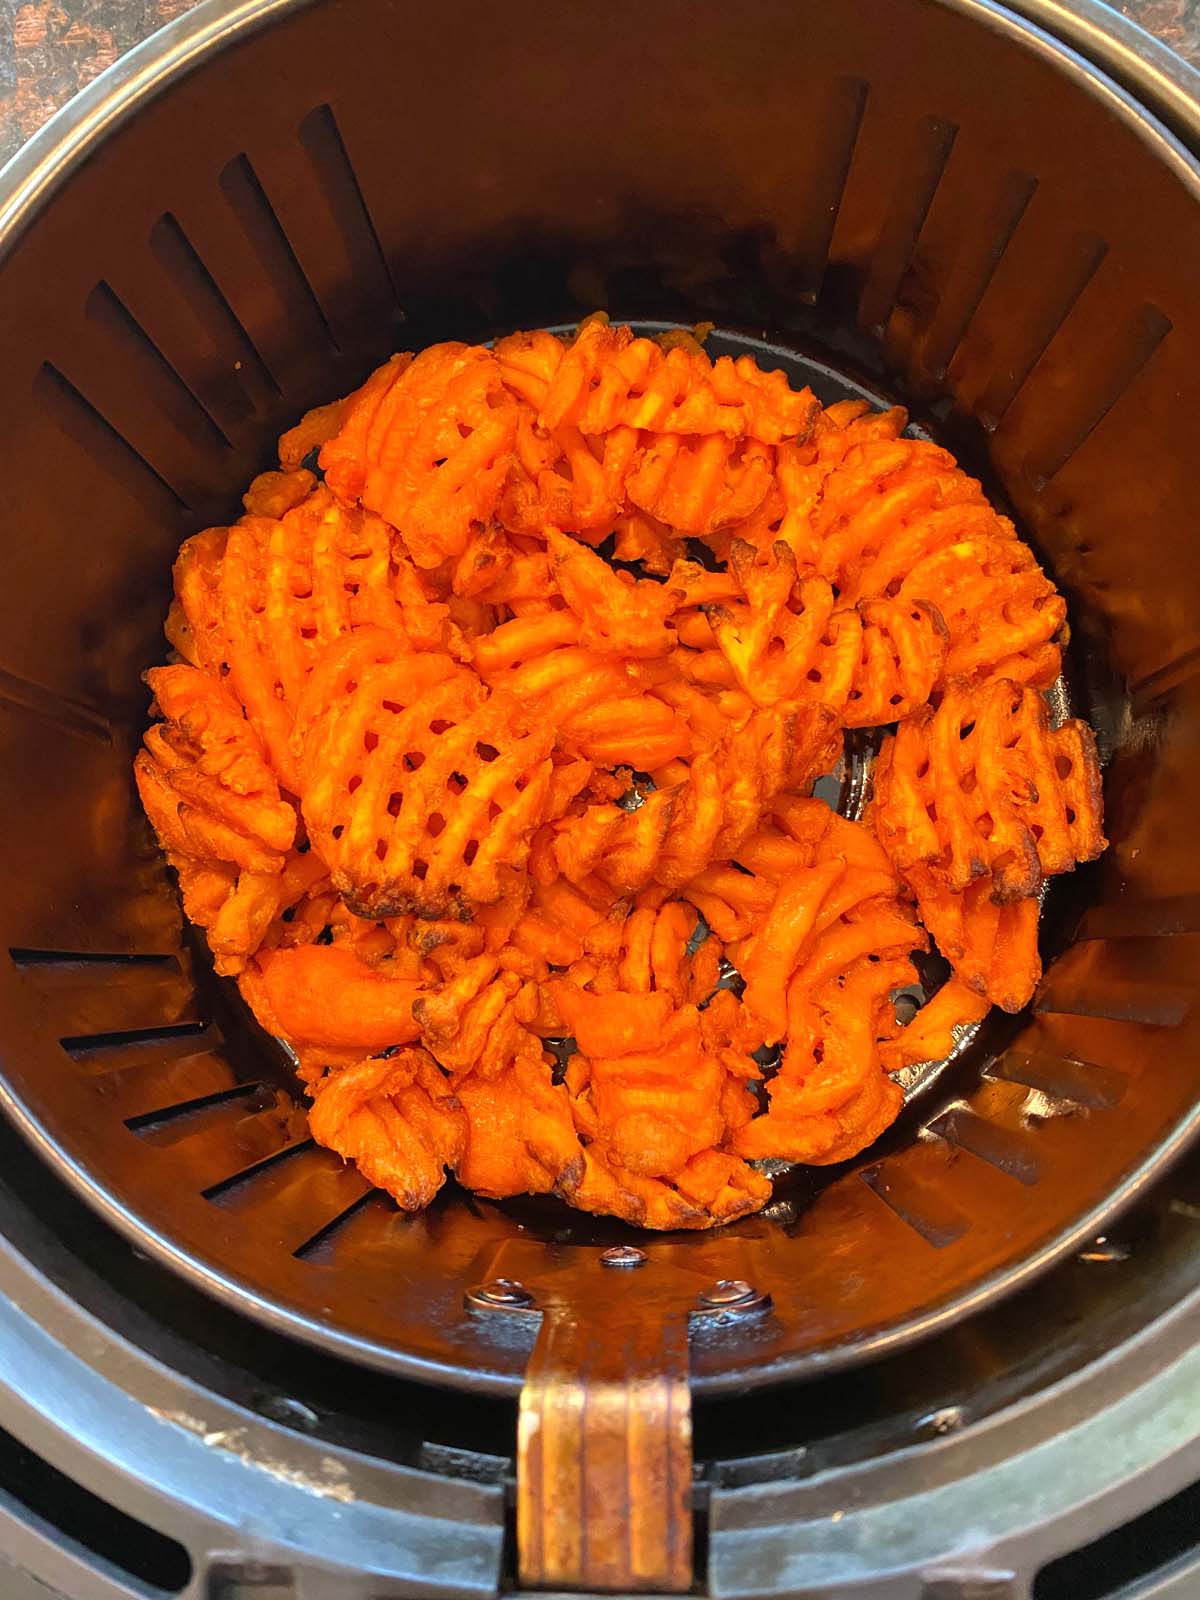 Old Fries + Waffle Iron = Awesome Pull-Apart Waffle Fries